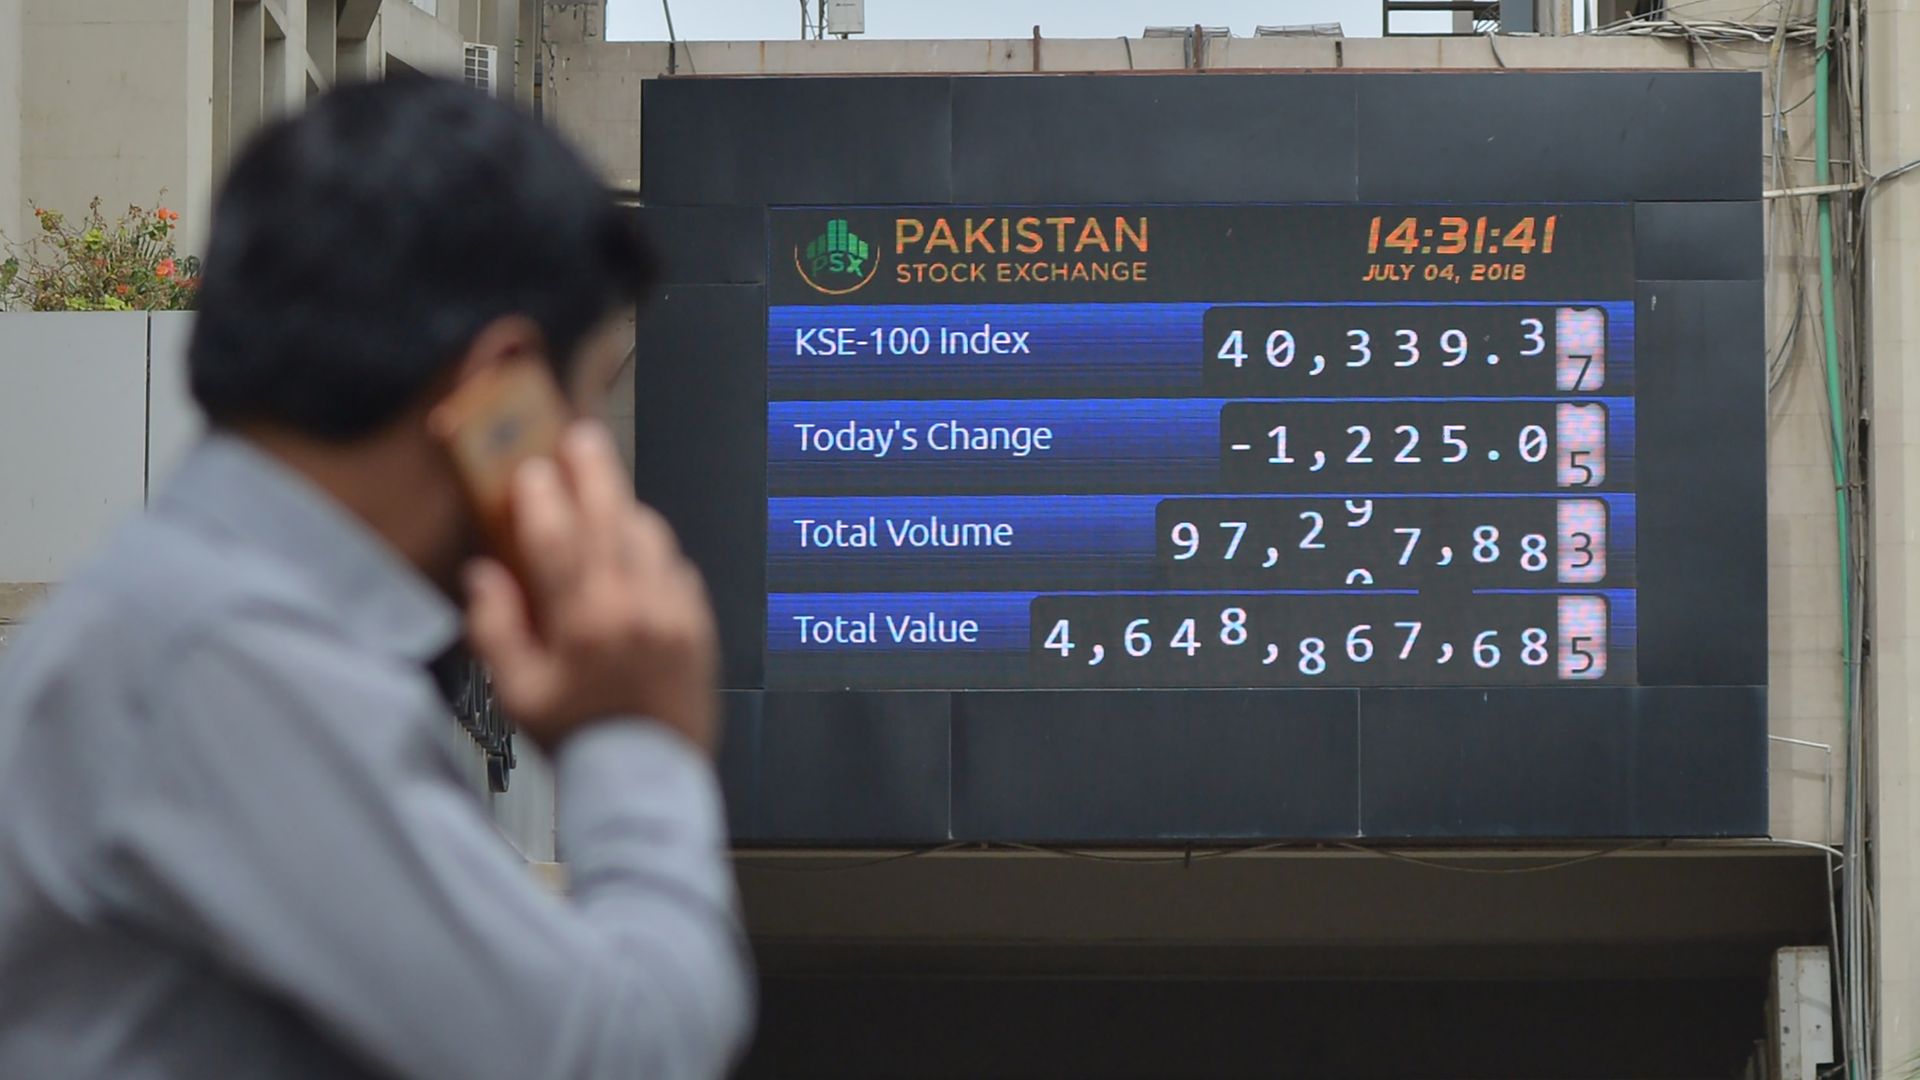 A Pakistani stockbroker looks at an index board during a trading session at the Pakistan Stock Exchange